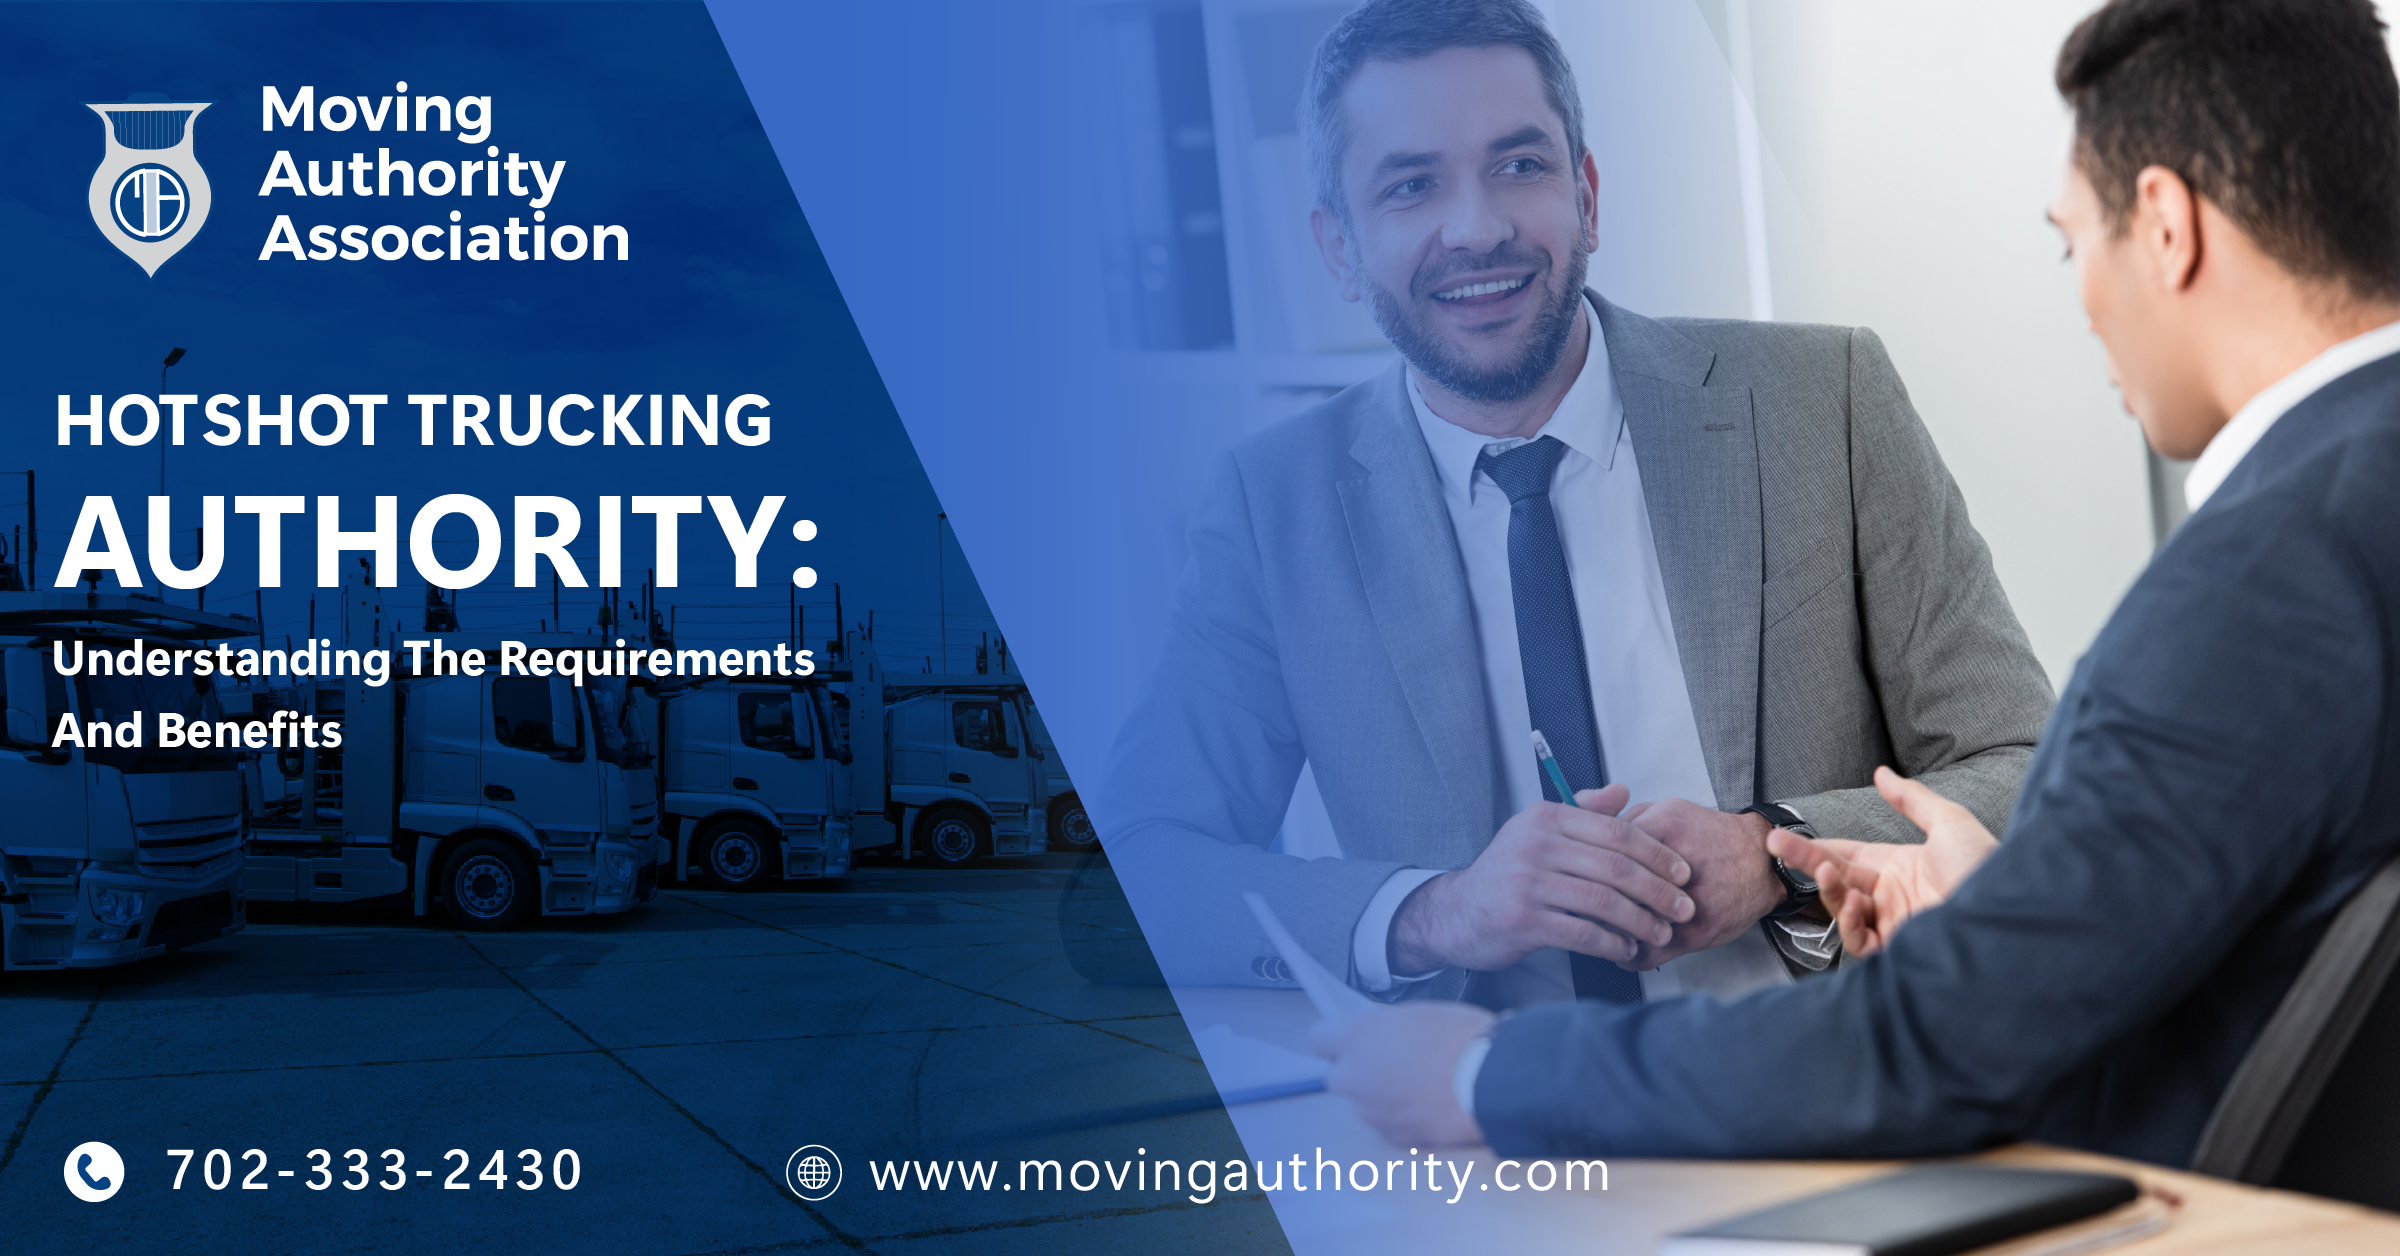 Moving Authority